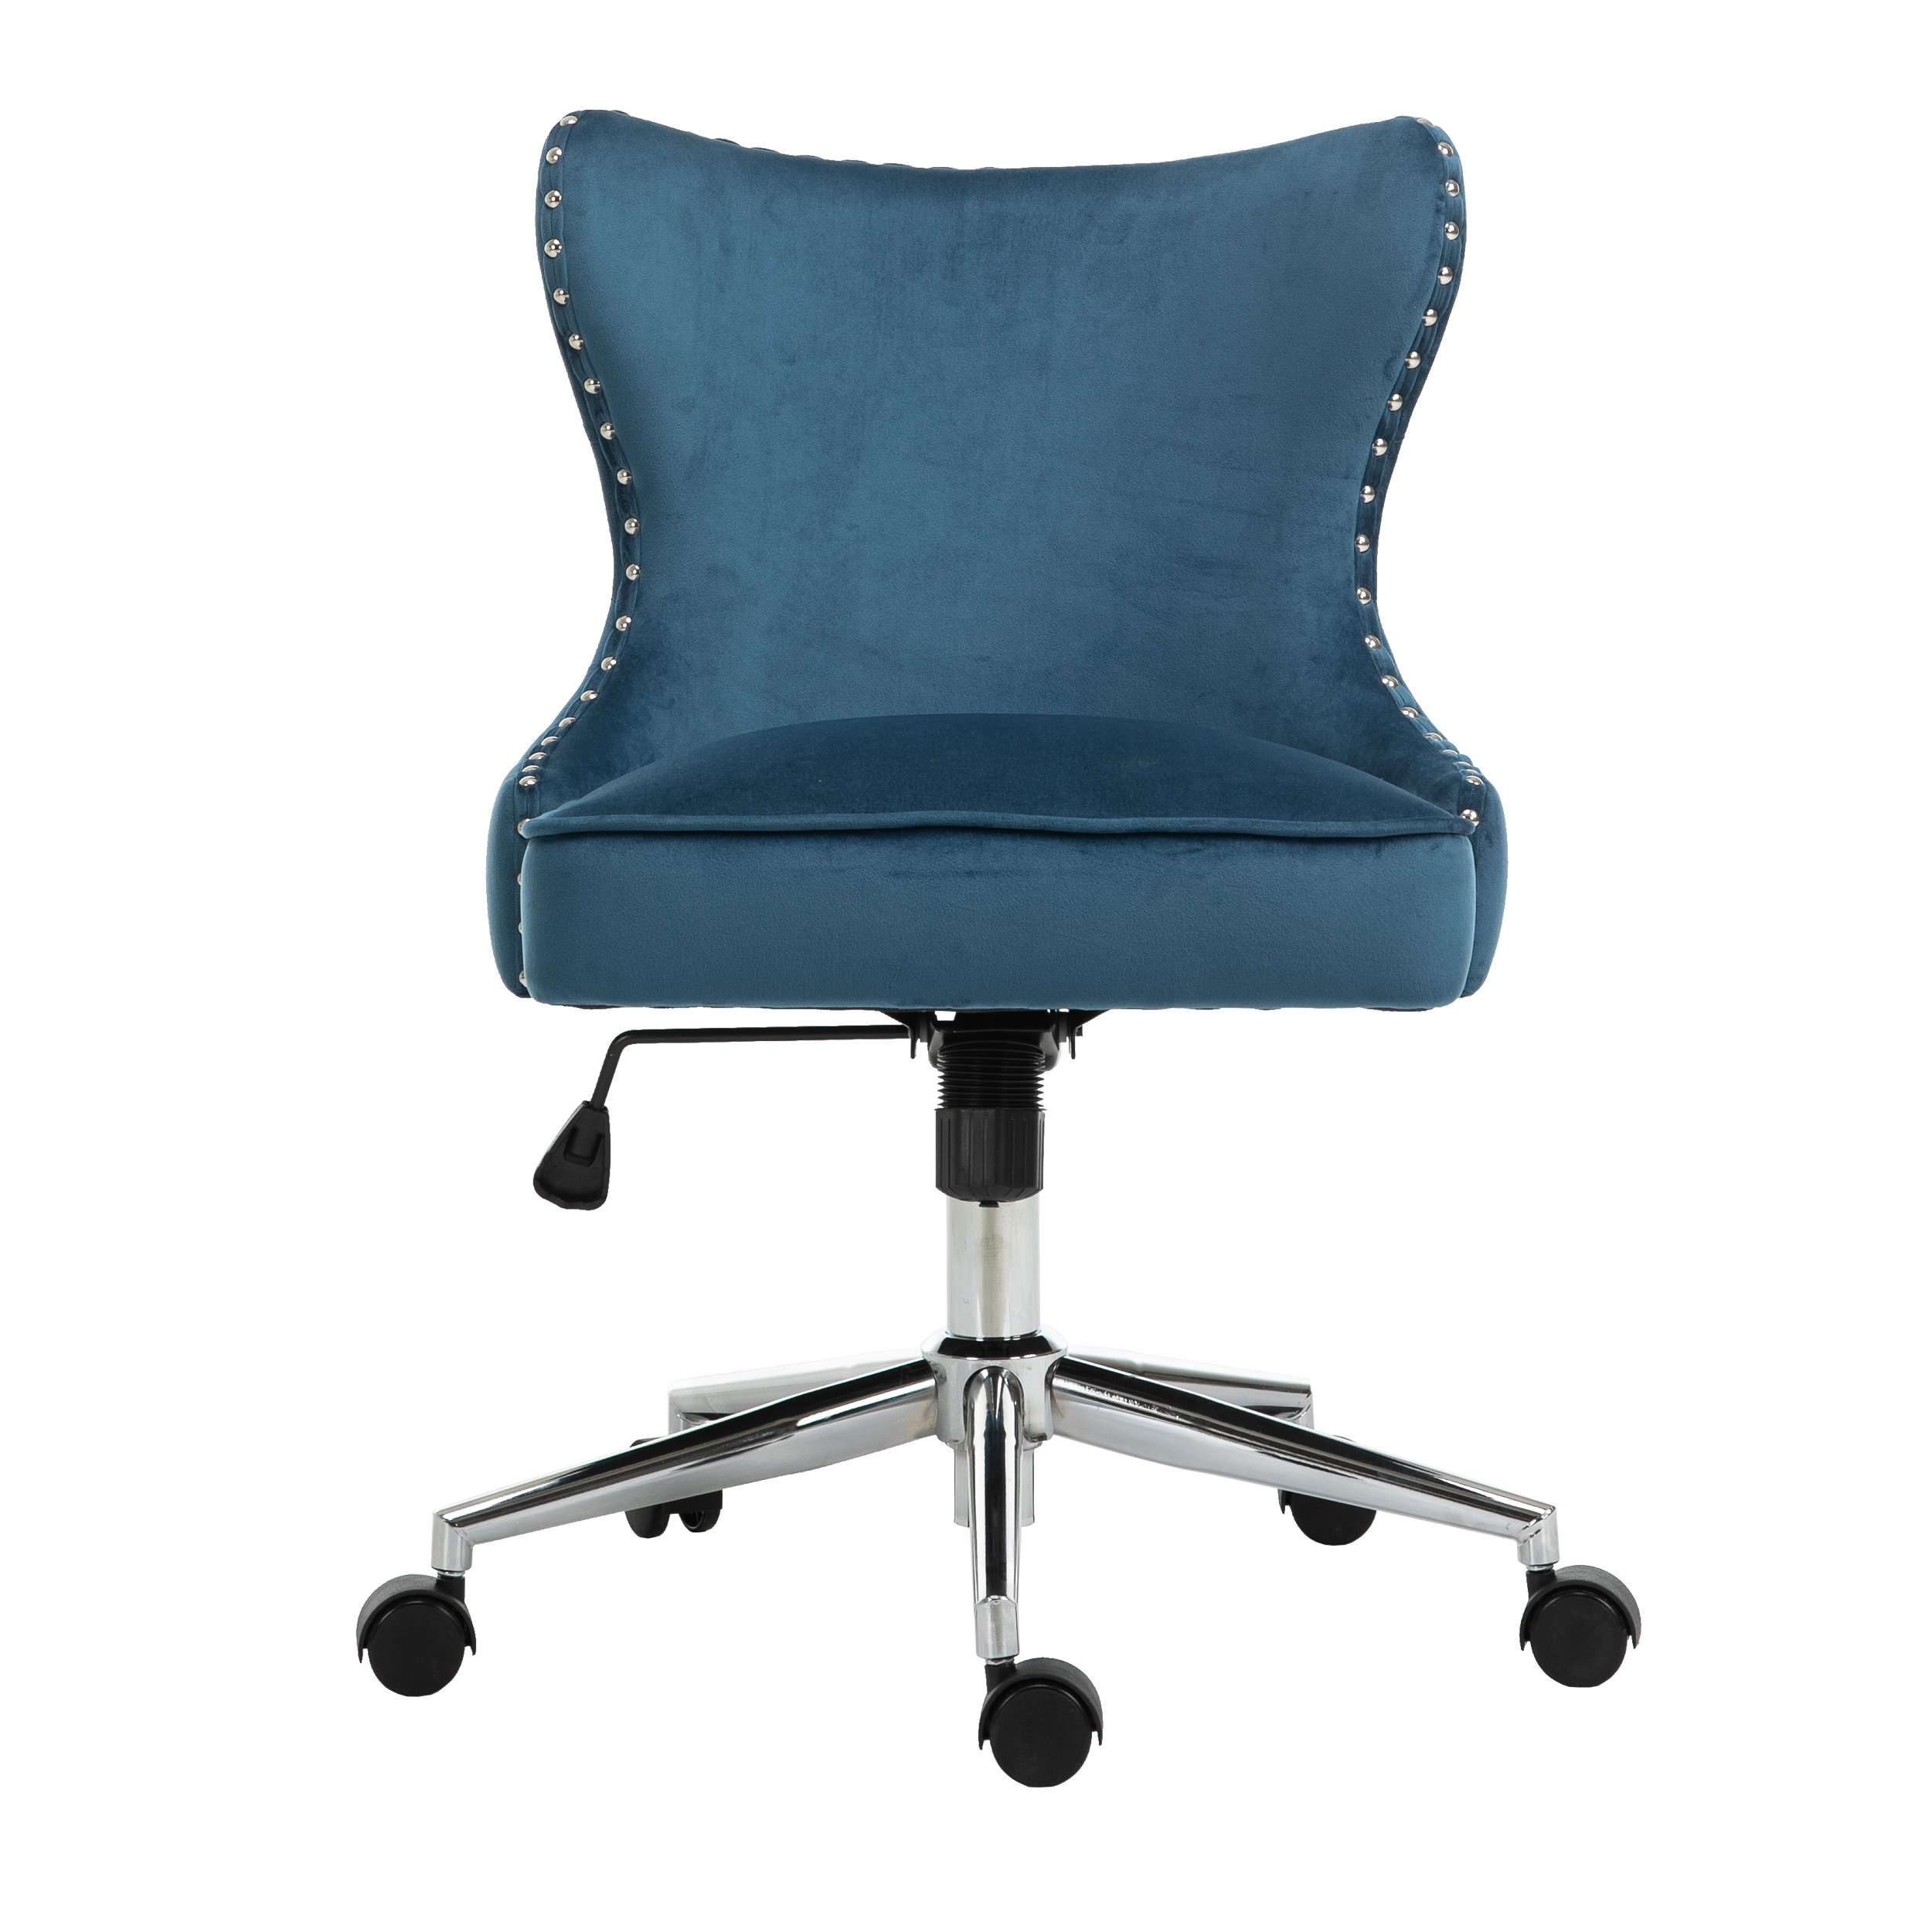 The velvect task chair with its gleaming nailhead trim-CASAINC